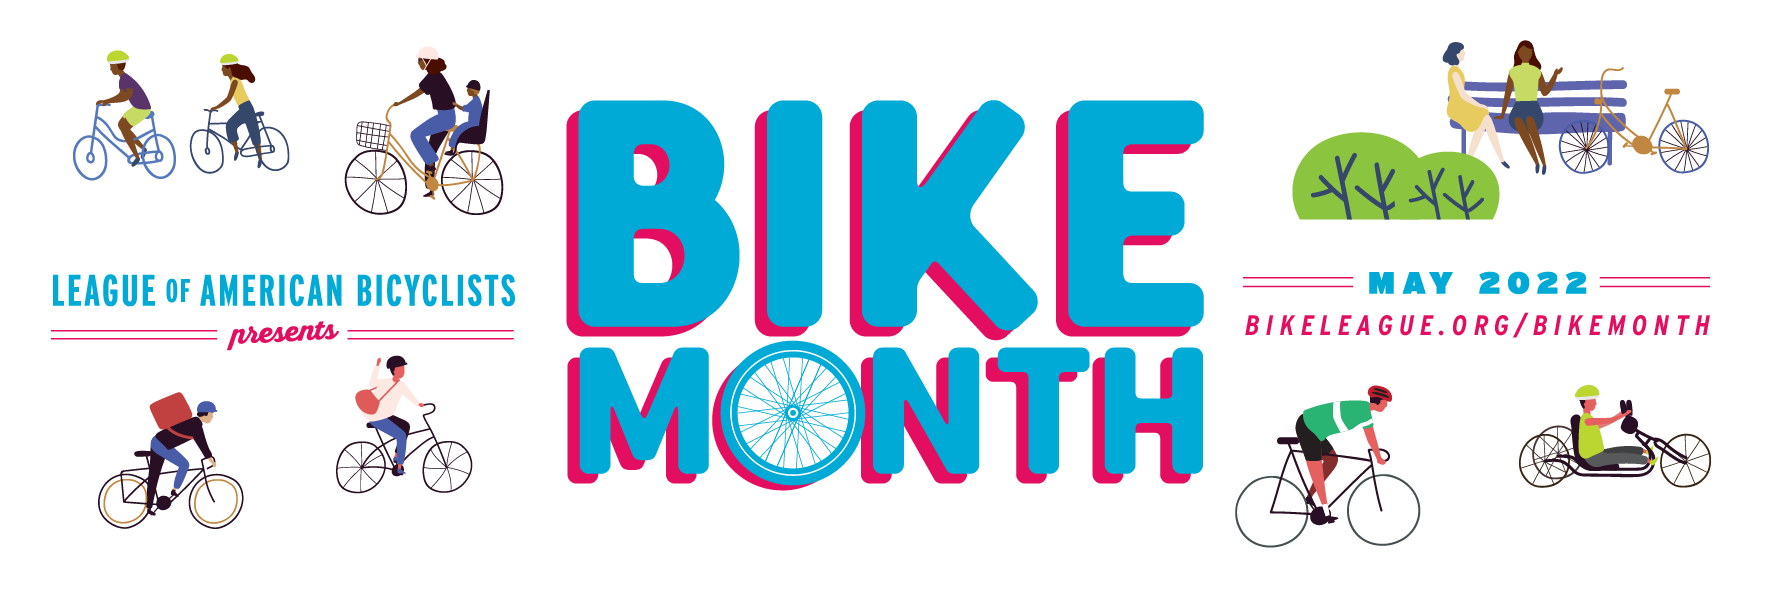 Poster that reads "League of American Bicyclists presents Bike Month 2022." Depicted are people of all ages biking across it. 